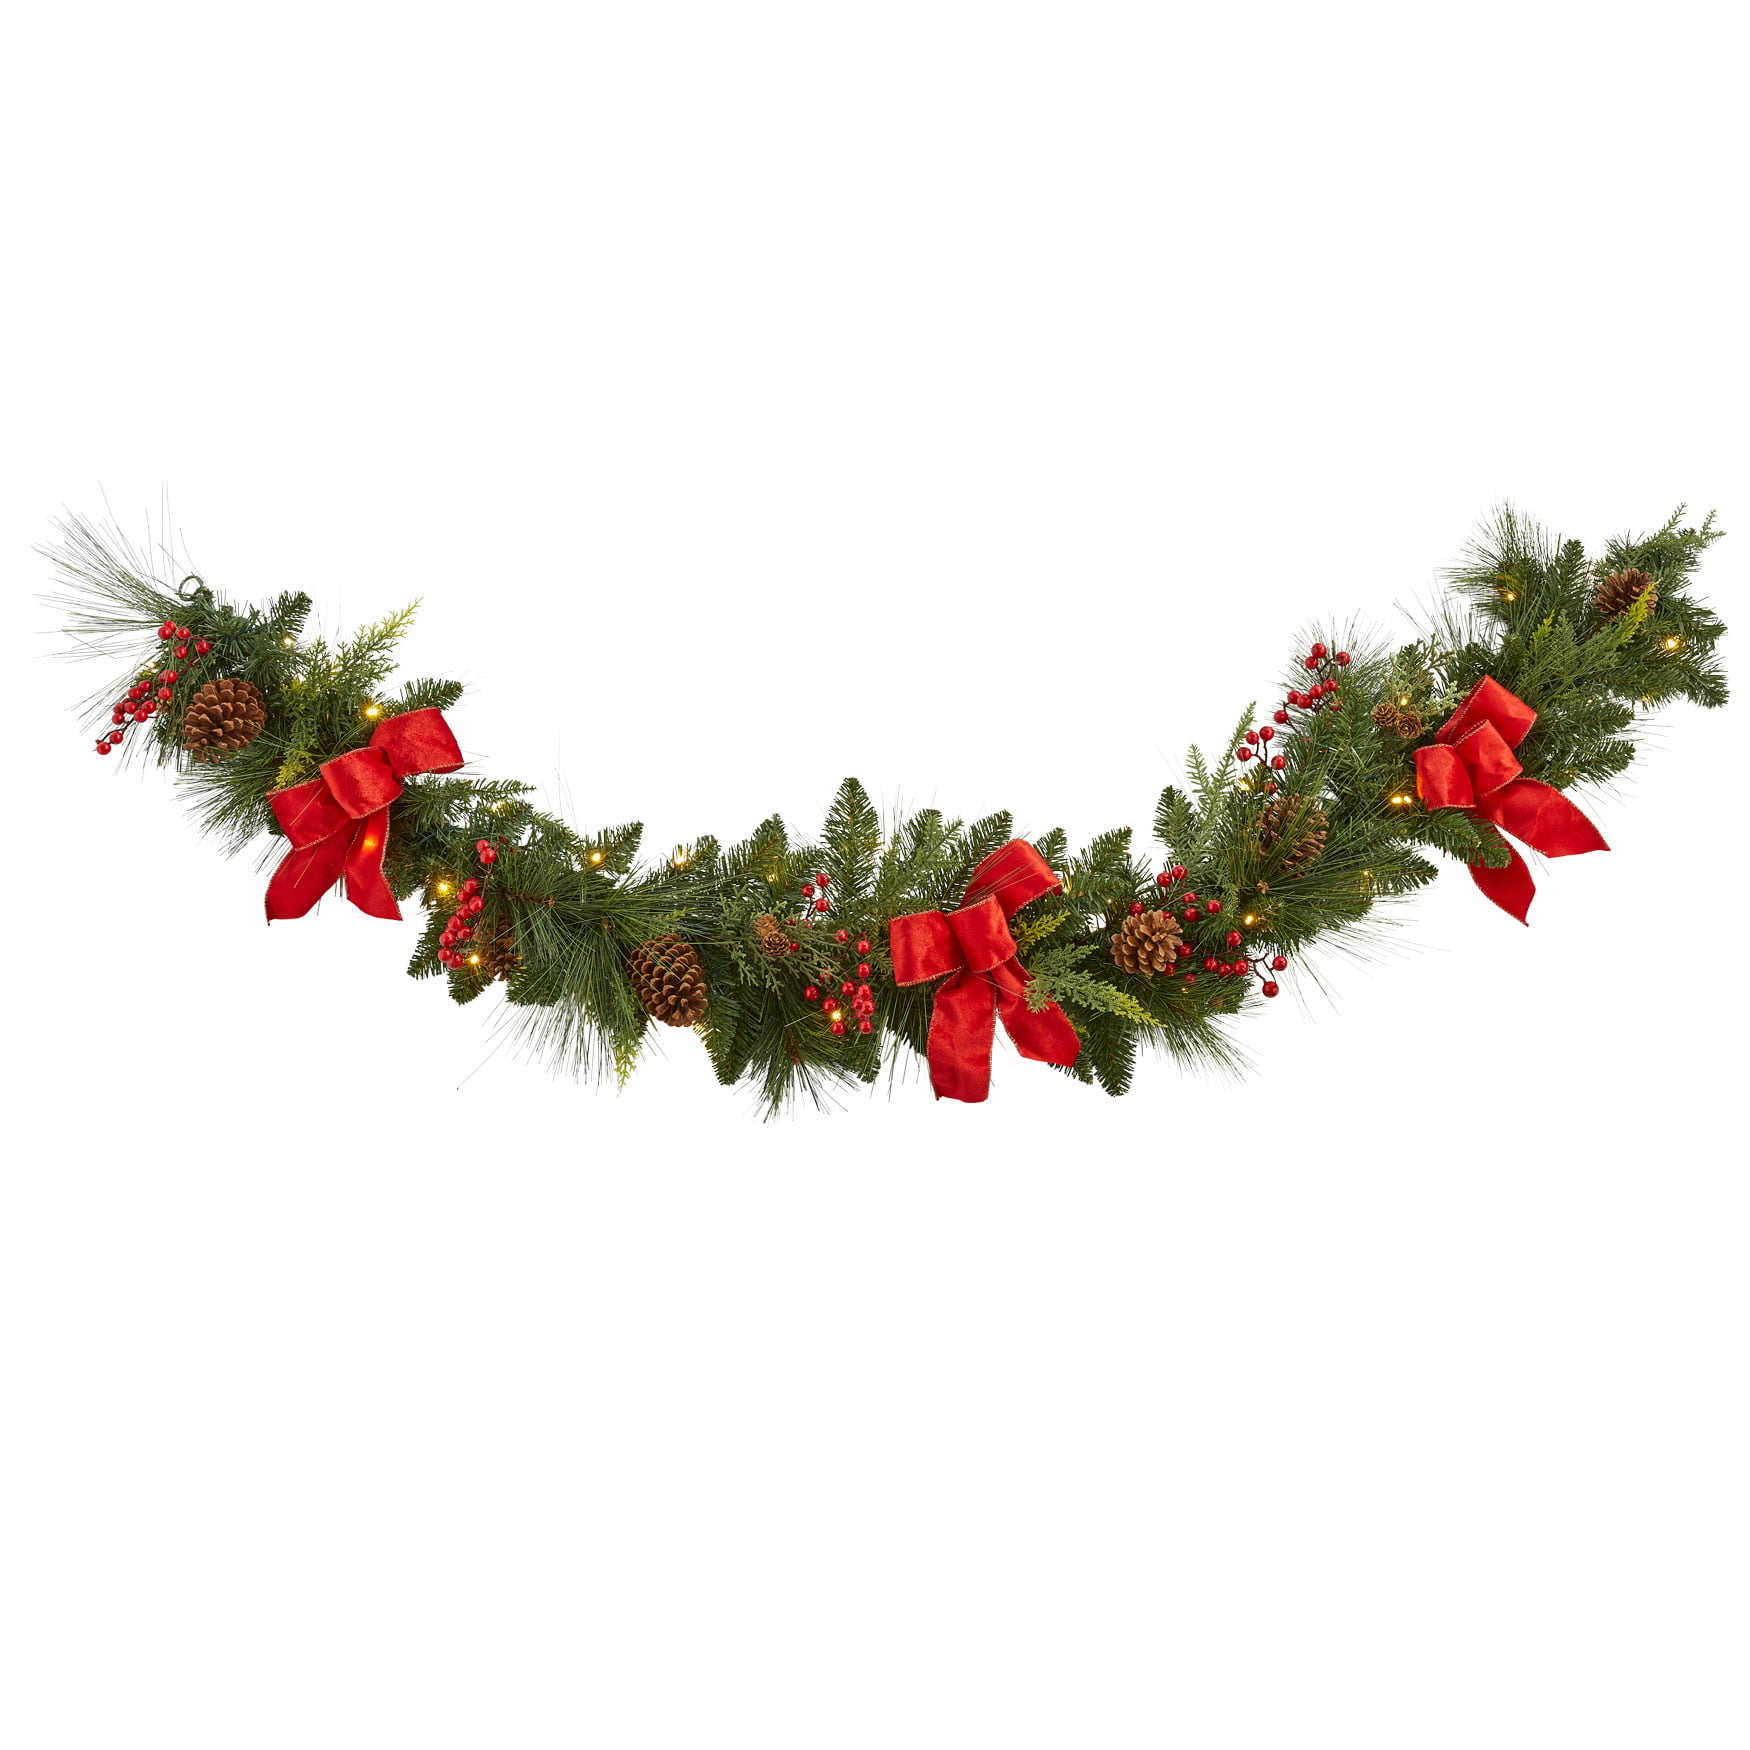 Foil Green & Red Holly Christmas Decor Christmas Holiday Garland 25 ft 